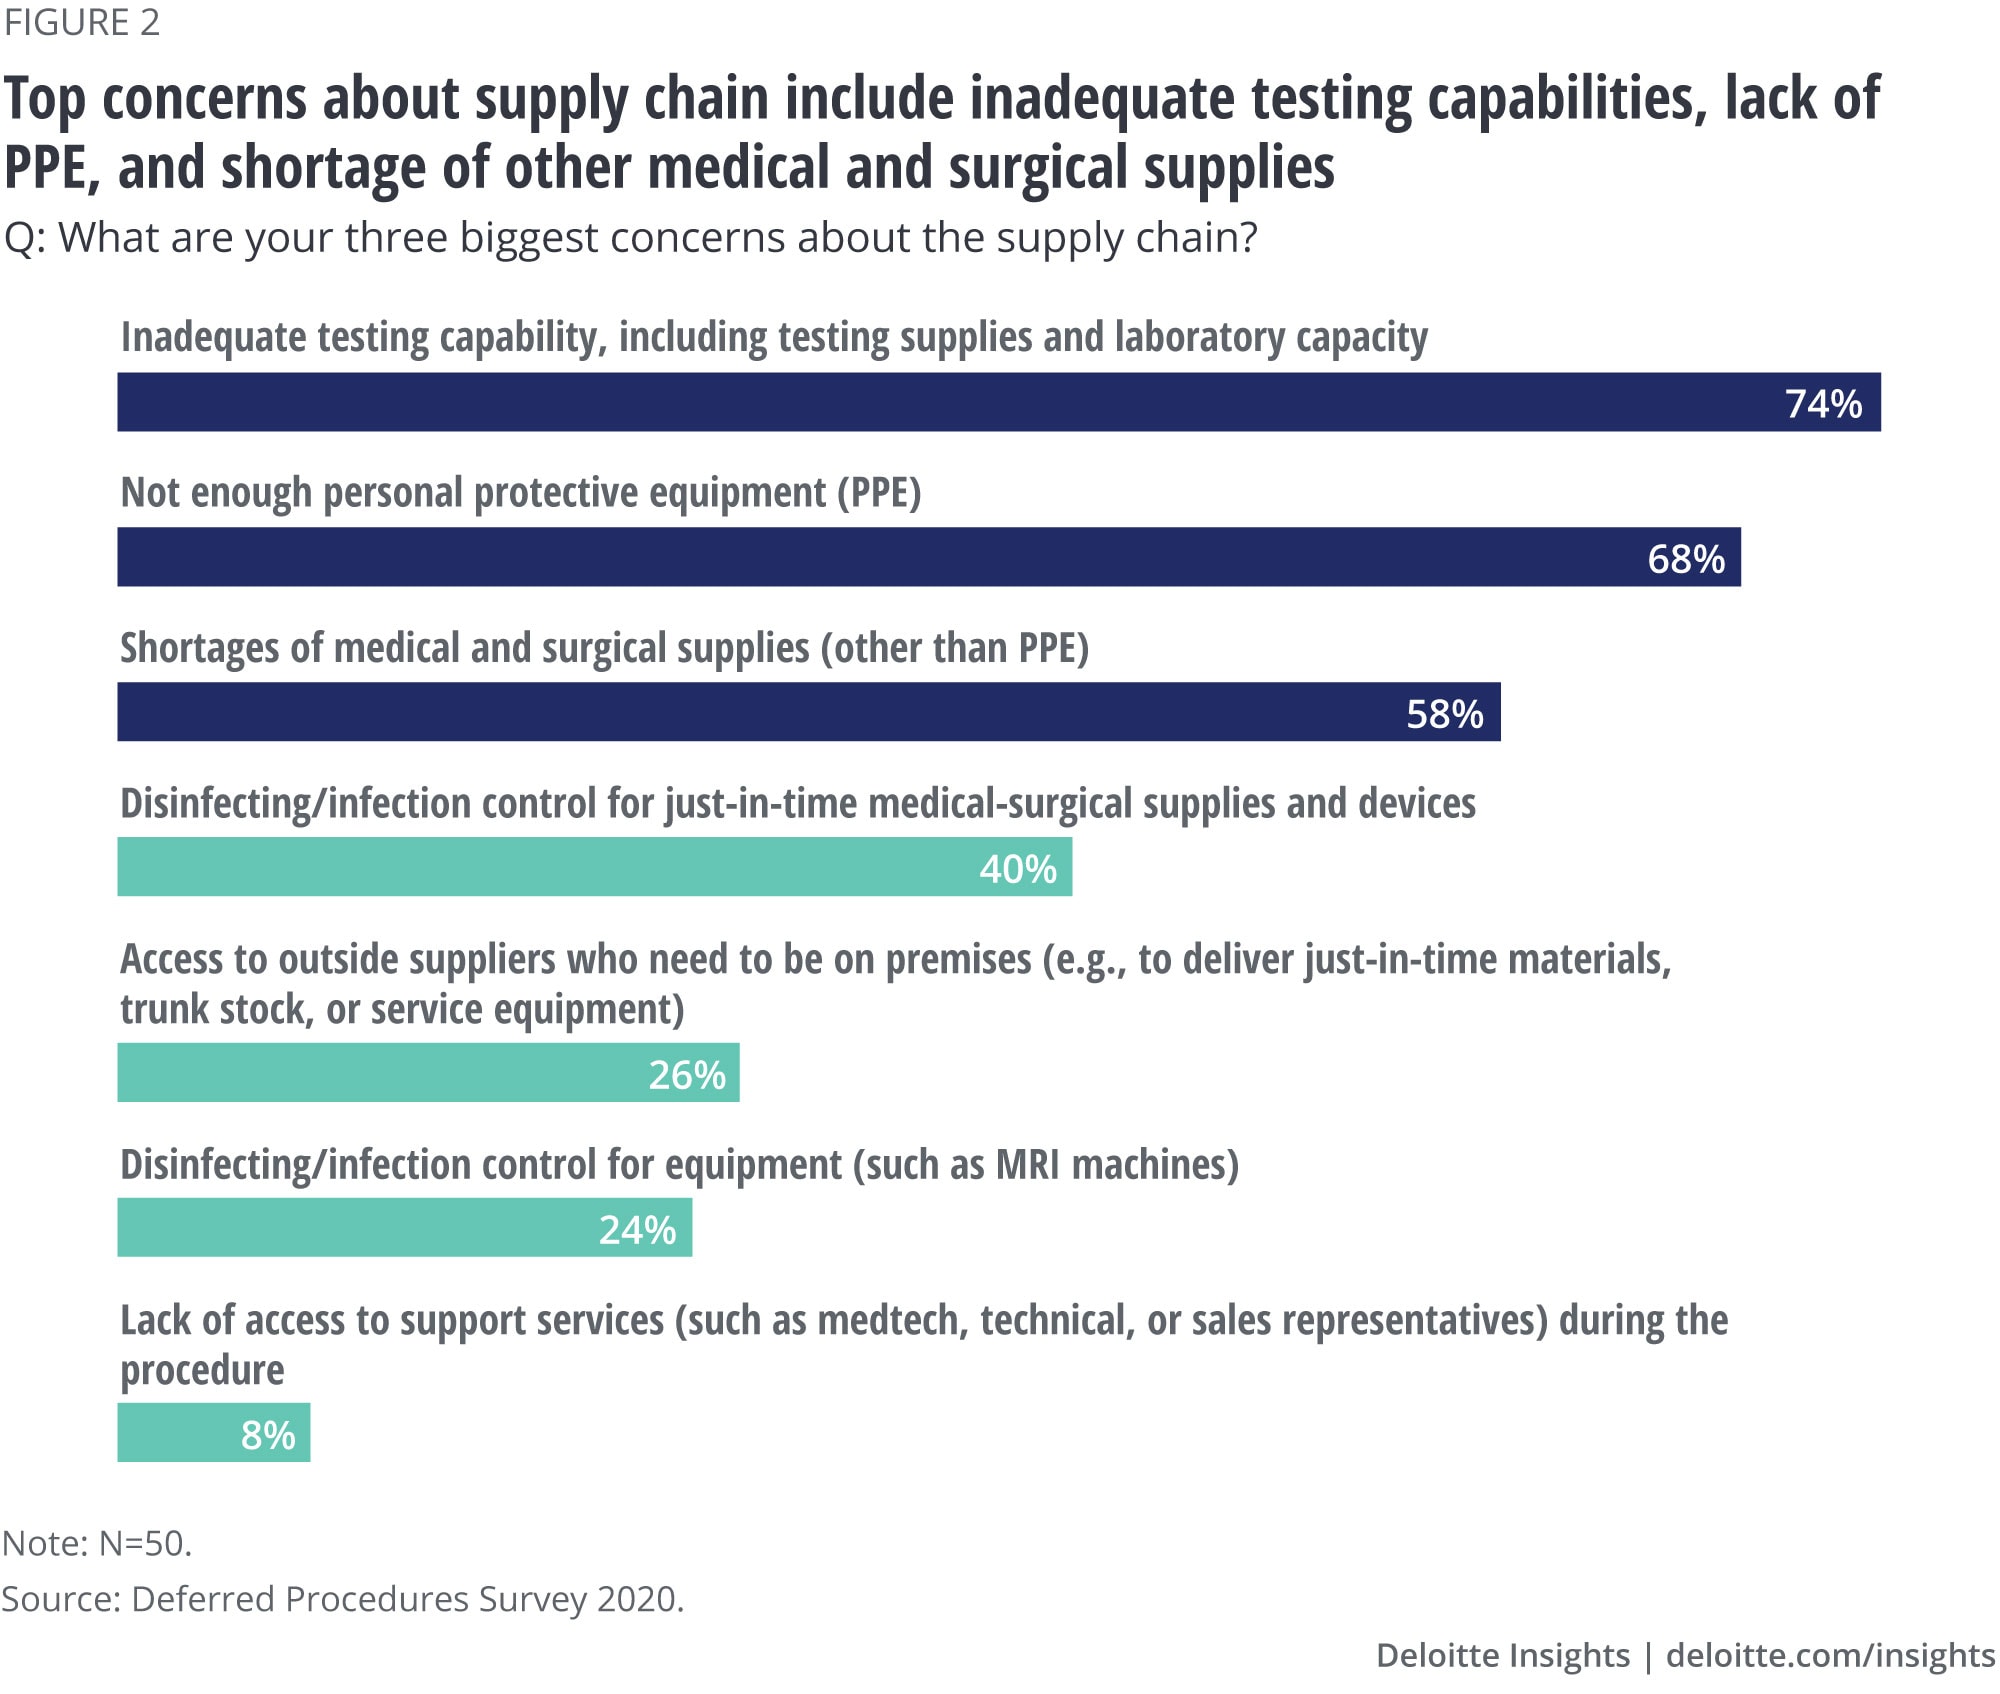 Top concerns about supply chain include inadequate testing capabilities, lack of PPE, and shortage of other medical and surgical supplies